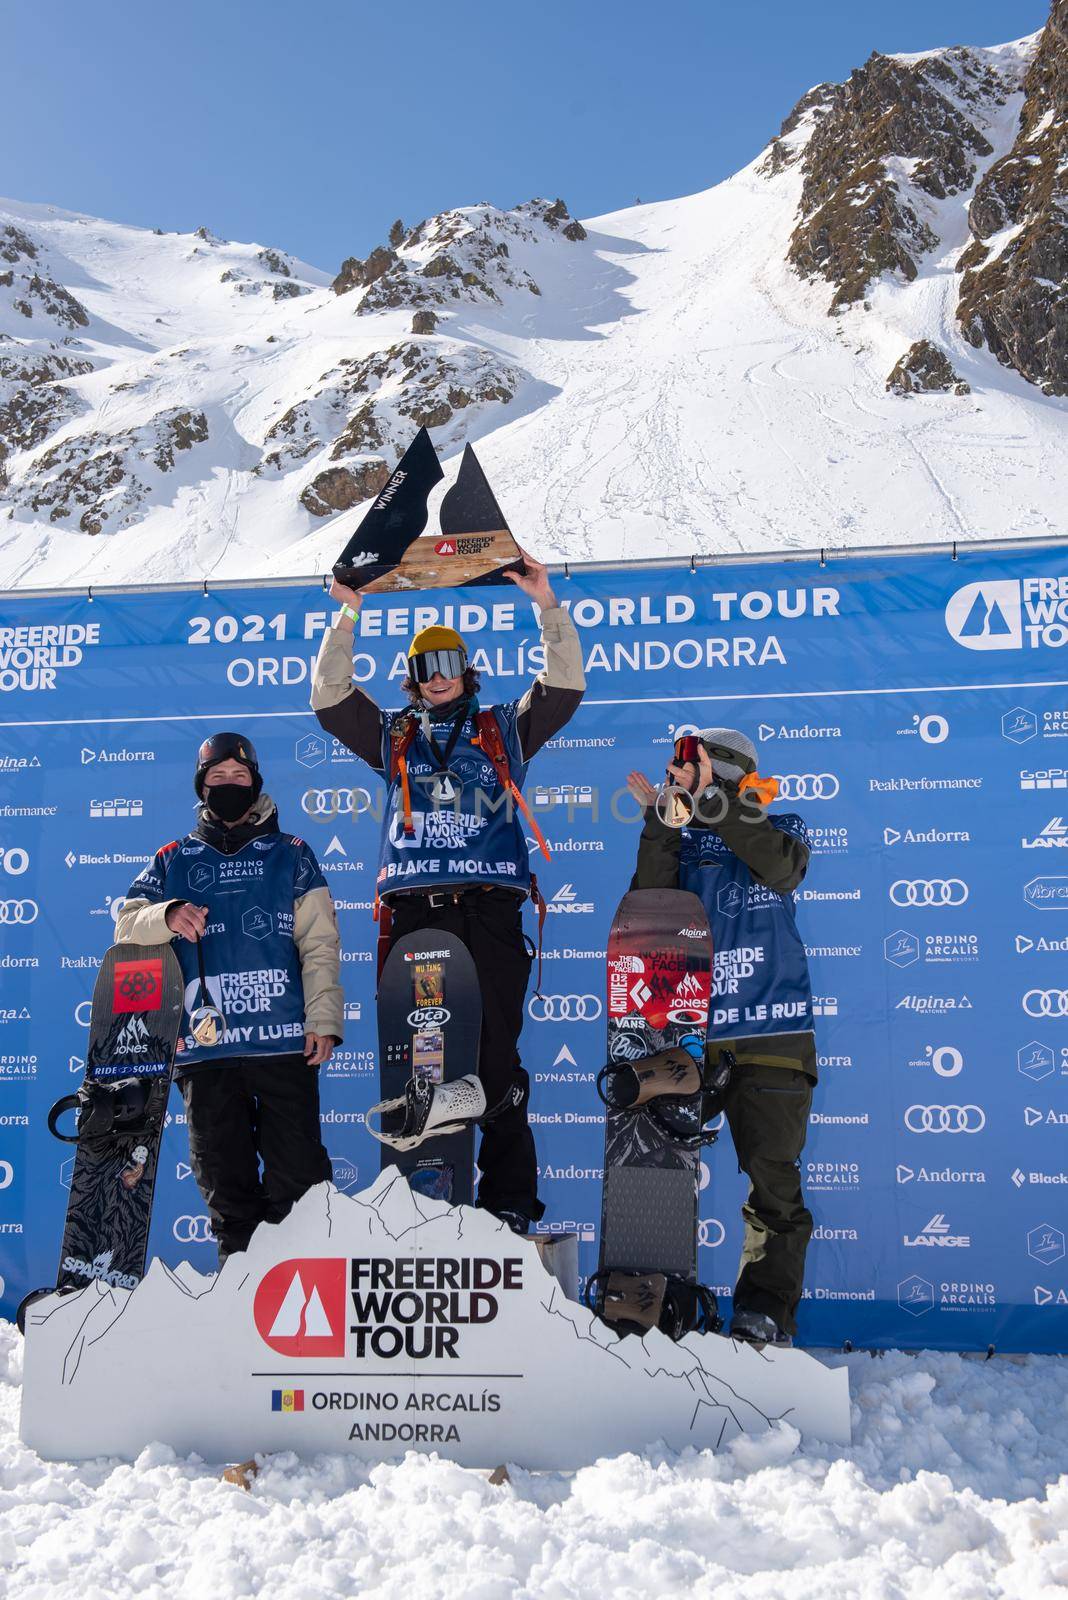 Ordino Arcalis, Andorra: 2021 February 24: Sammy Lueber, Blaker Moller, De le Rue in action at the Freeride World Tour 2021 Step 2 at Ordino Alcalis in Andorra in the winter of 2021.